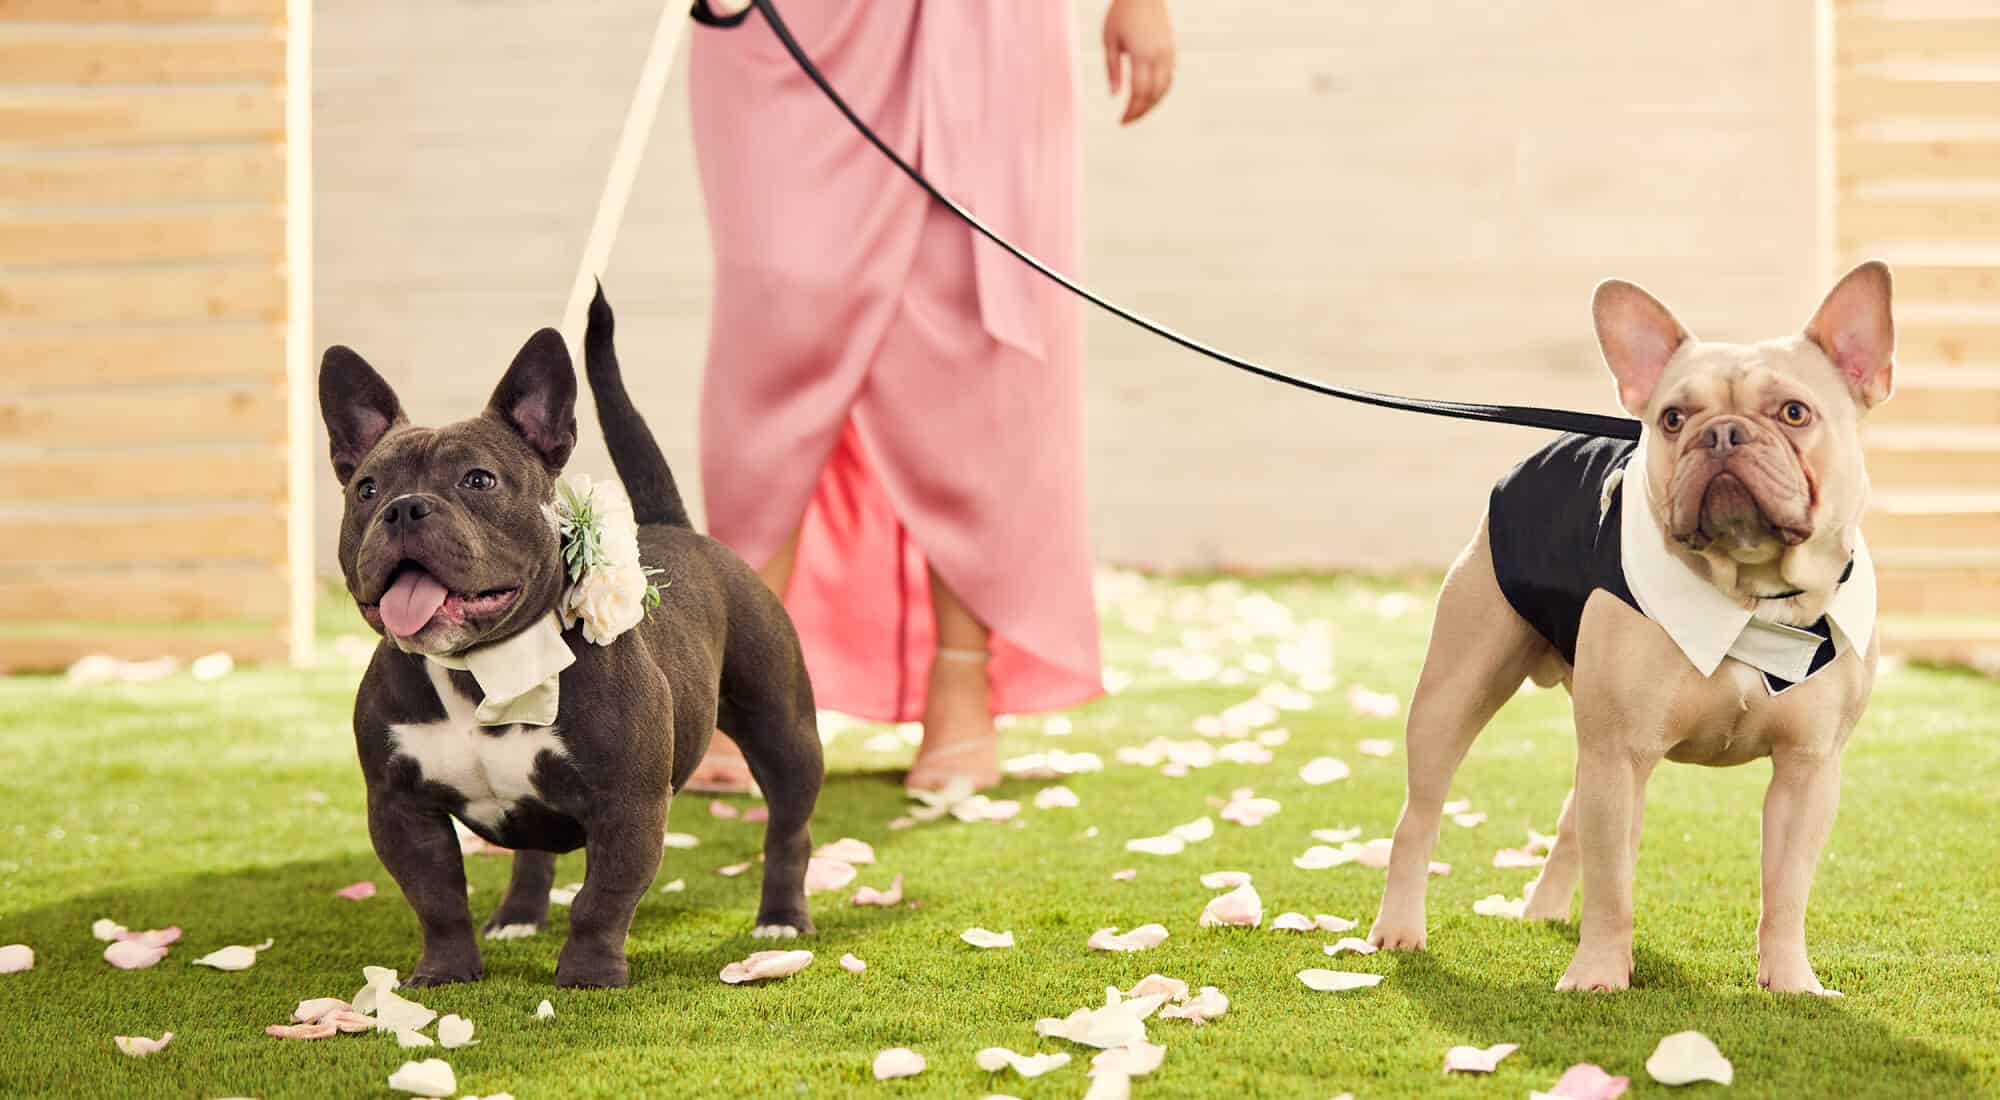 Two dogs on a leash in a wedding